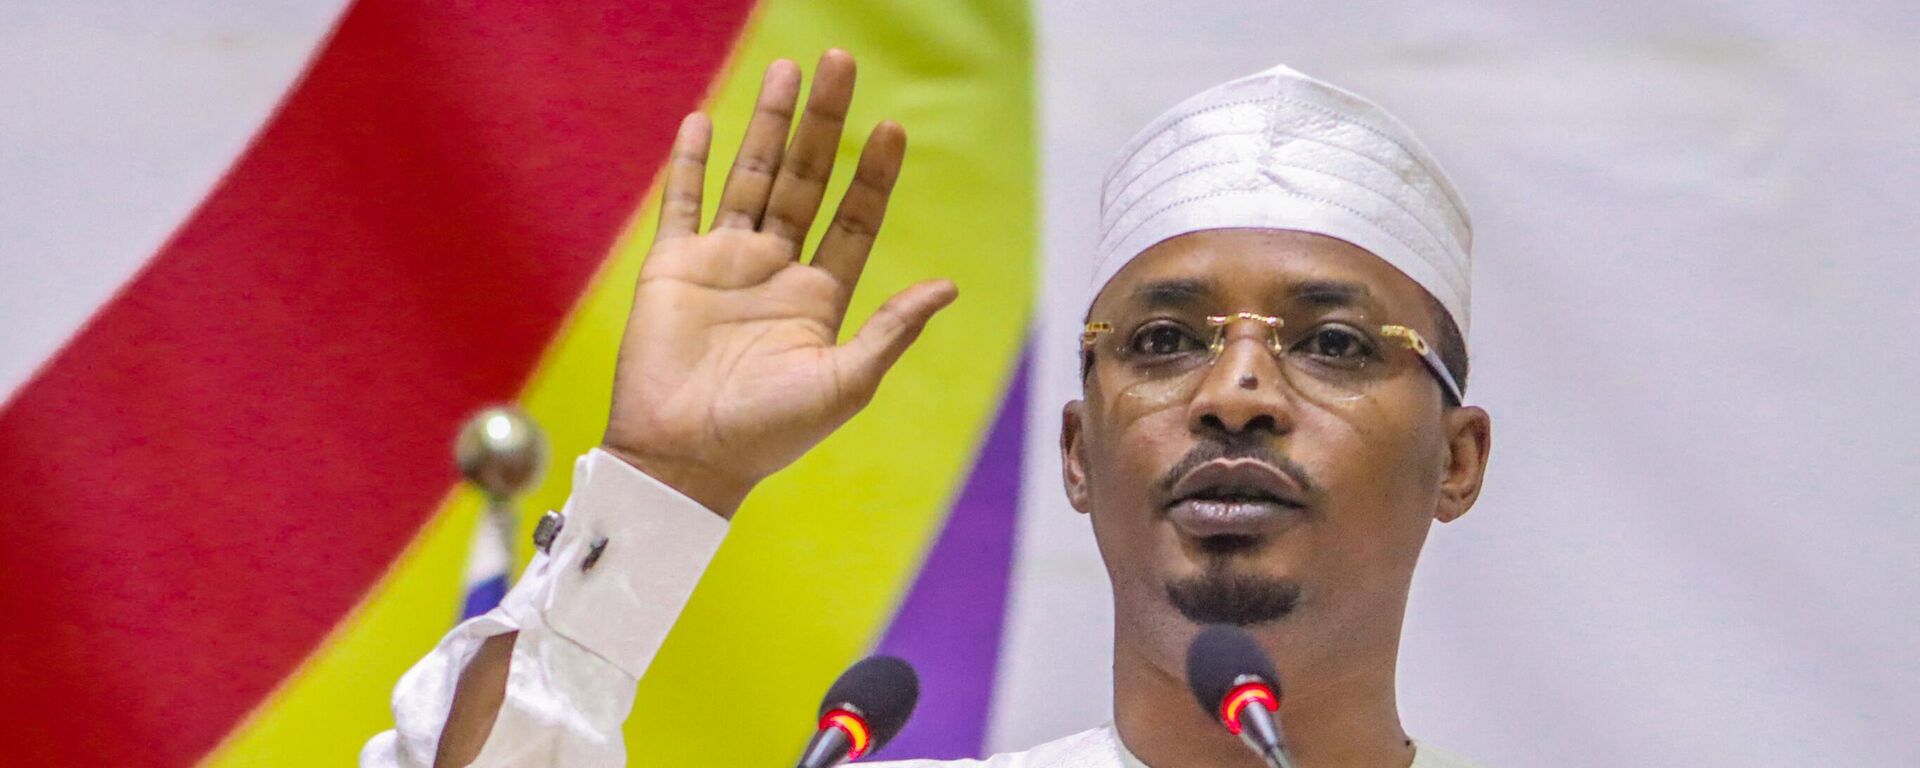 Mahamat Idriss Deby raises his hand as he is sworn in as Chad's transitional president, in N’Djamena on October 10, 2022. (Photo by DENIS SASSOU GUEIPEUR / AFP) - Sputnik International, 1920, 25.10.2022